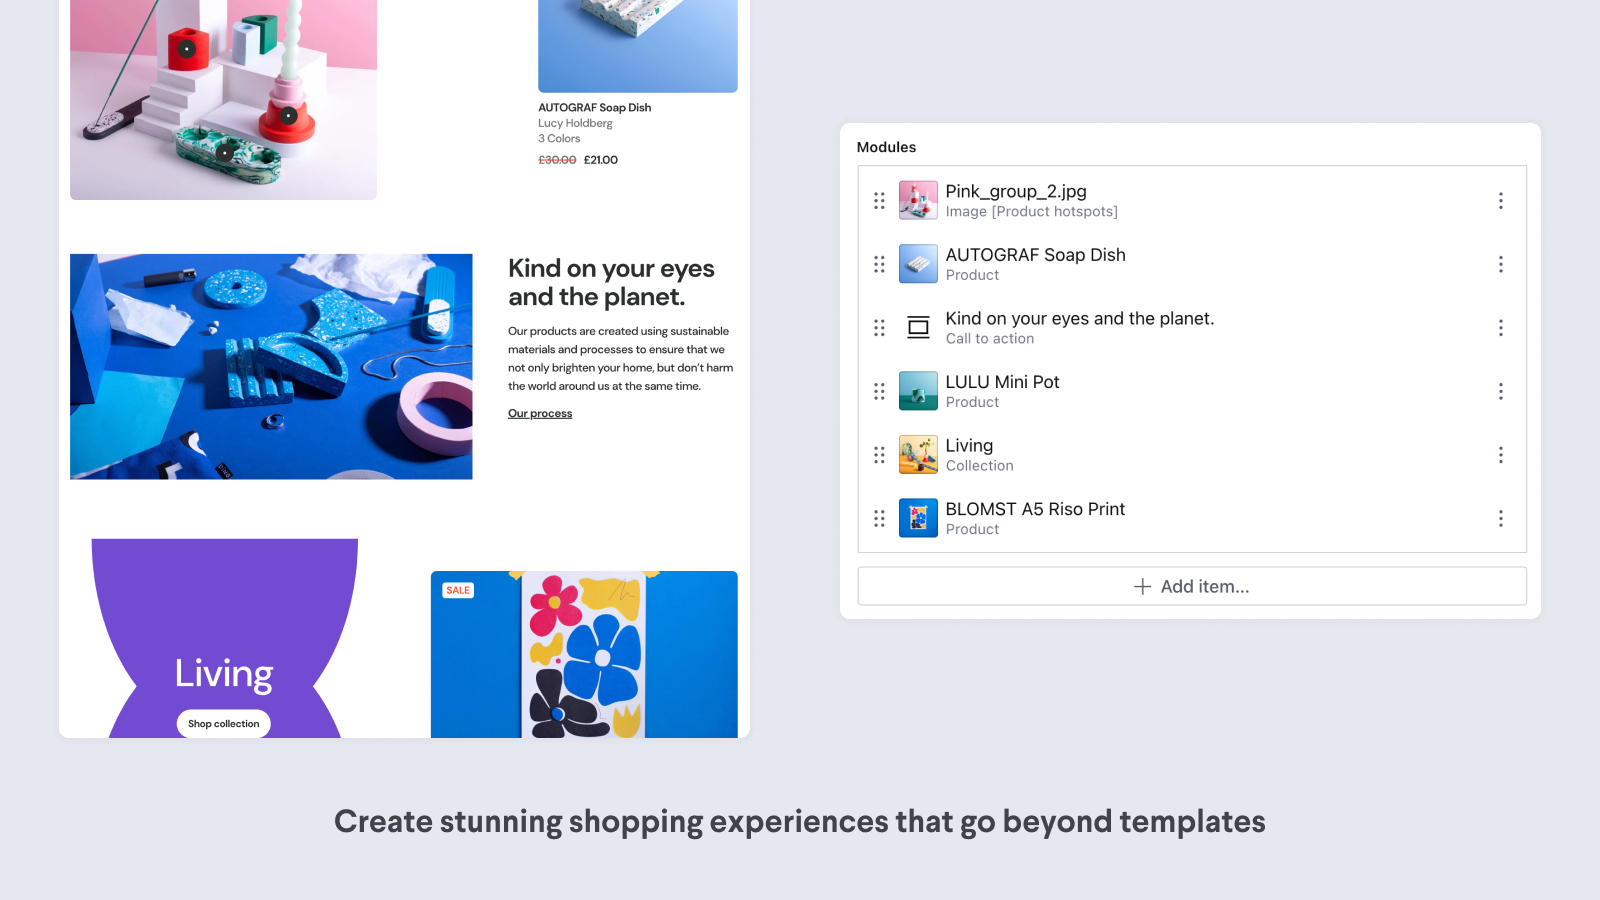 Go beyond templates and create remarkable shopping experiences.